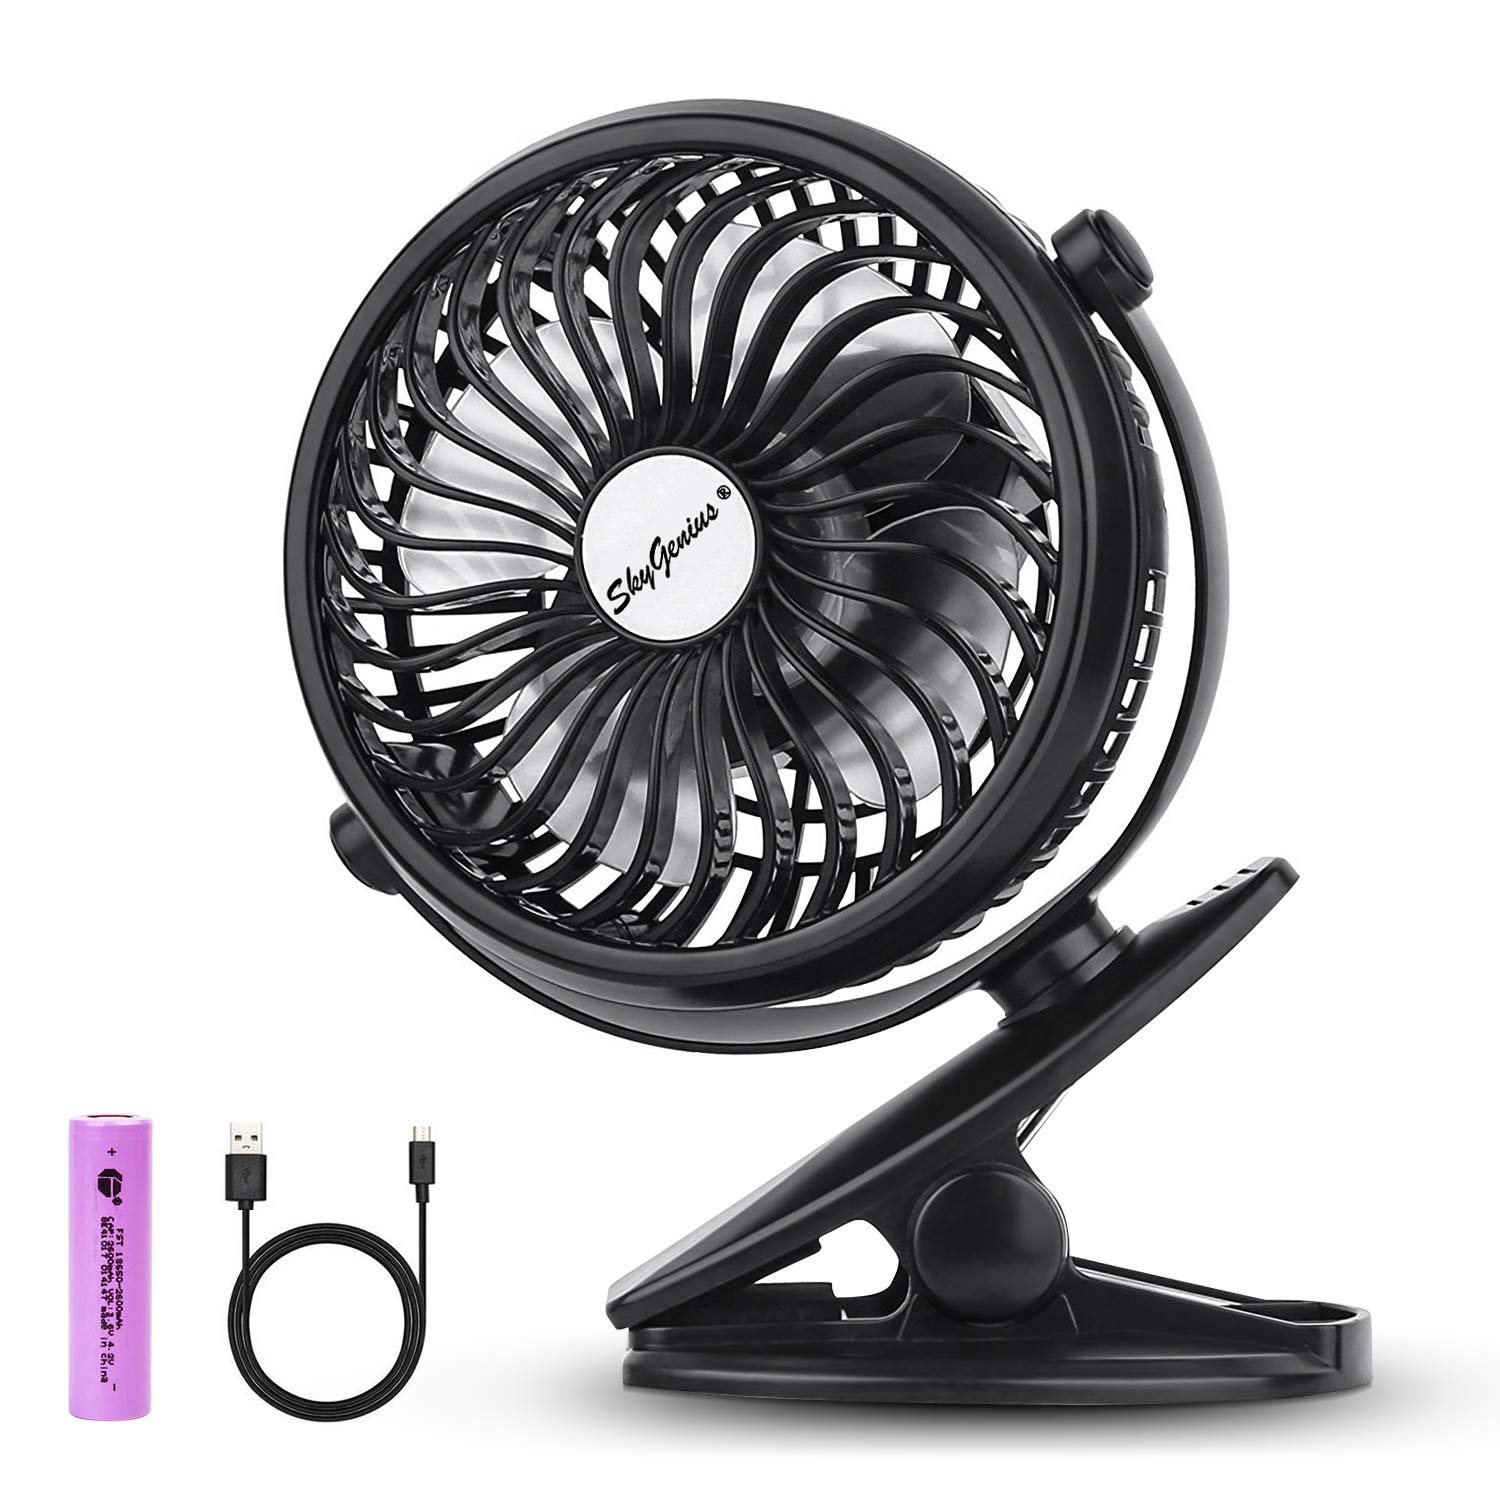 10 Best Stroller Fan For Ba To Protect Them From Hot Summer intended for dimensions 1500 X 1500